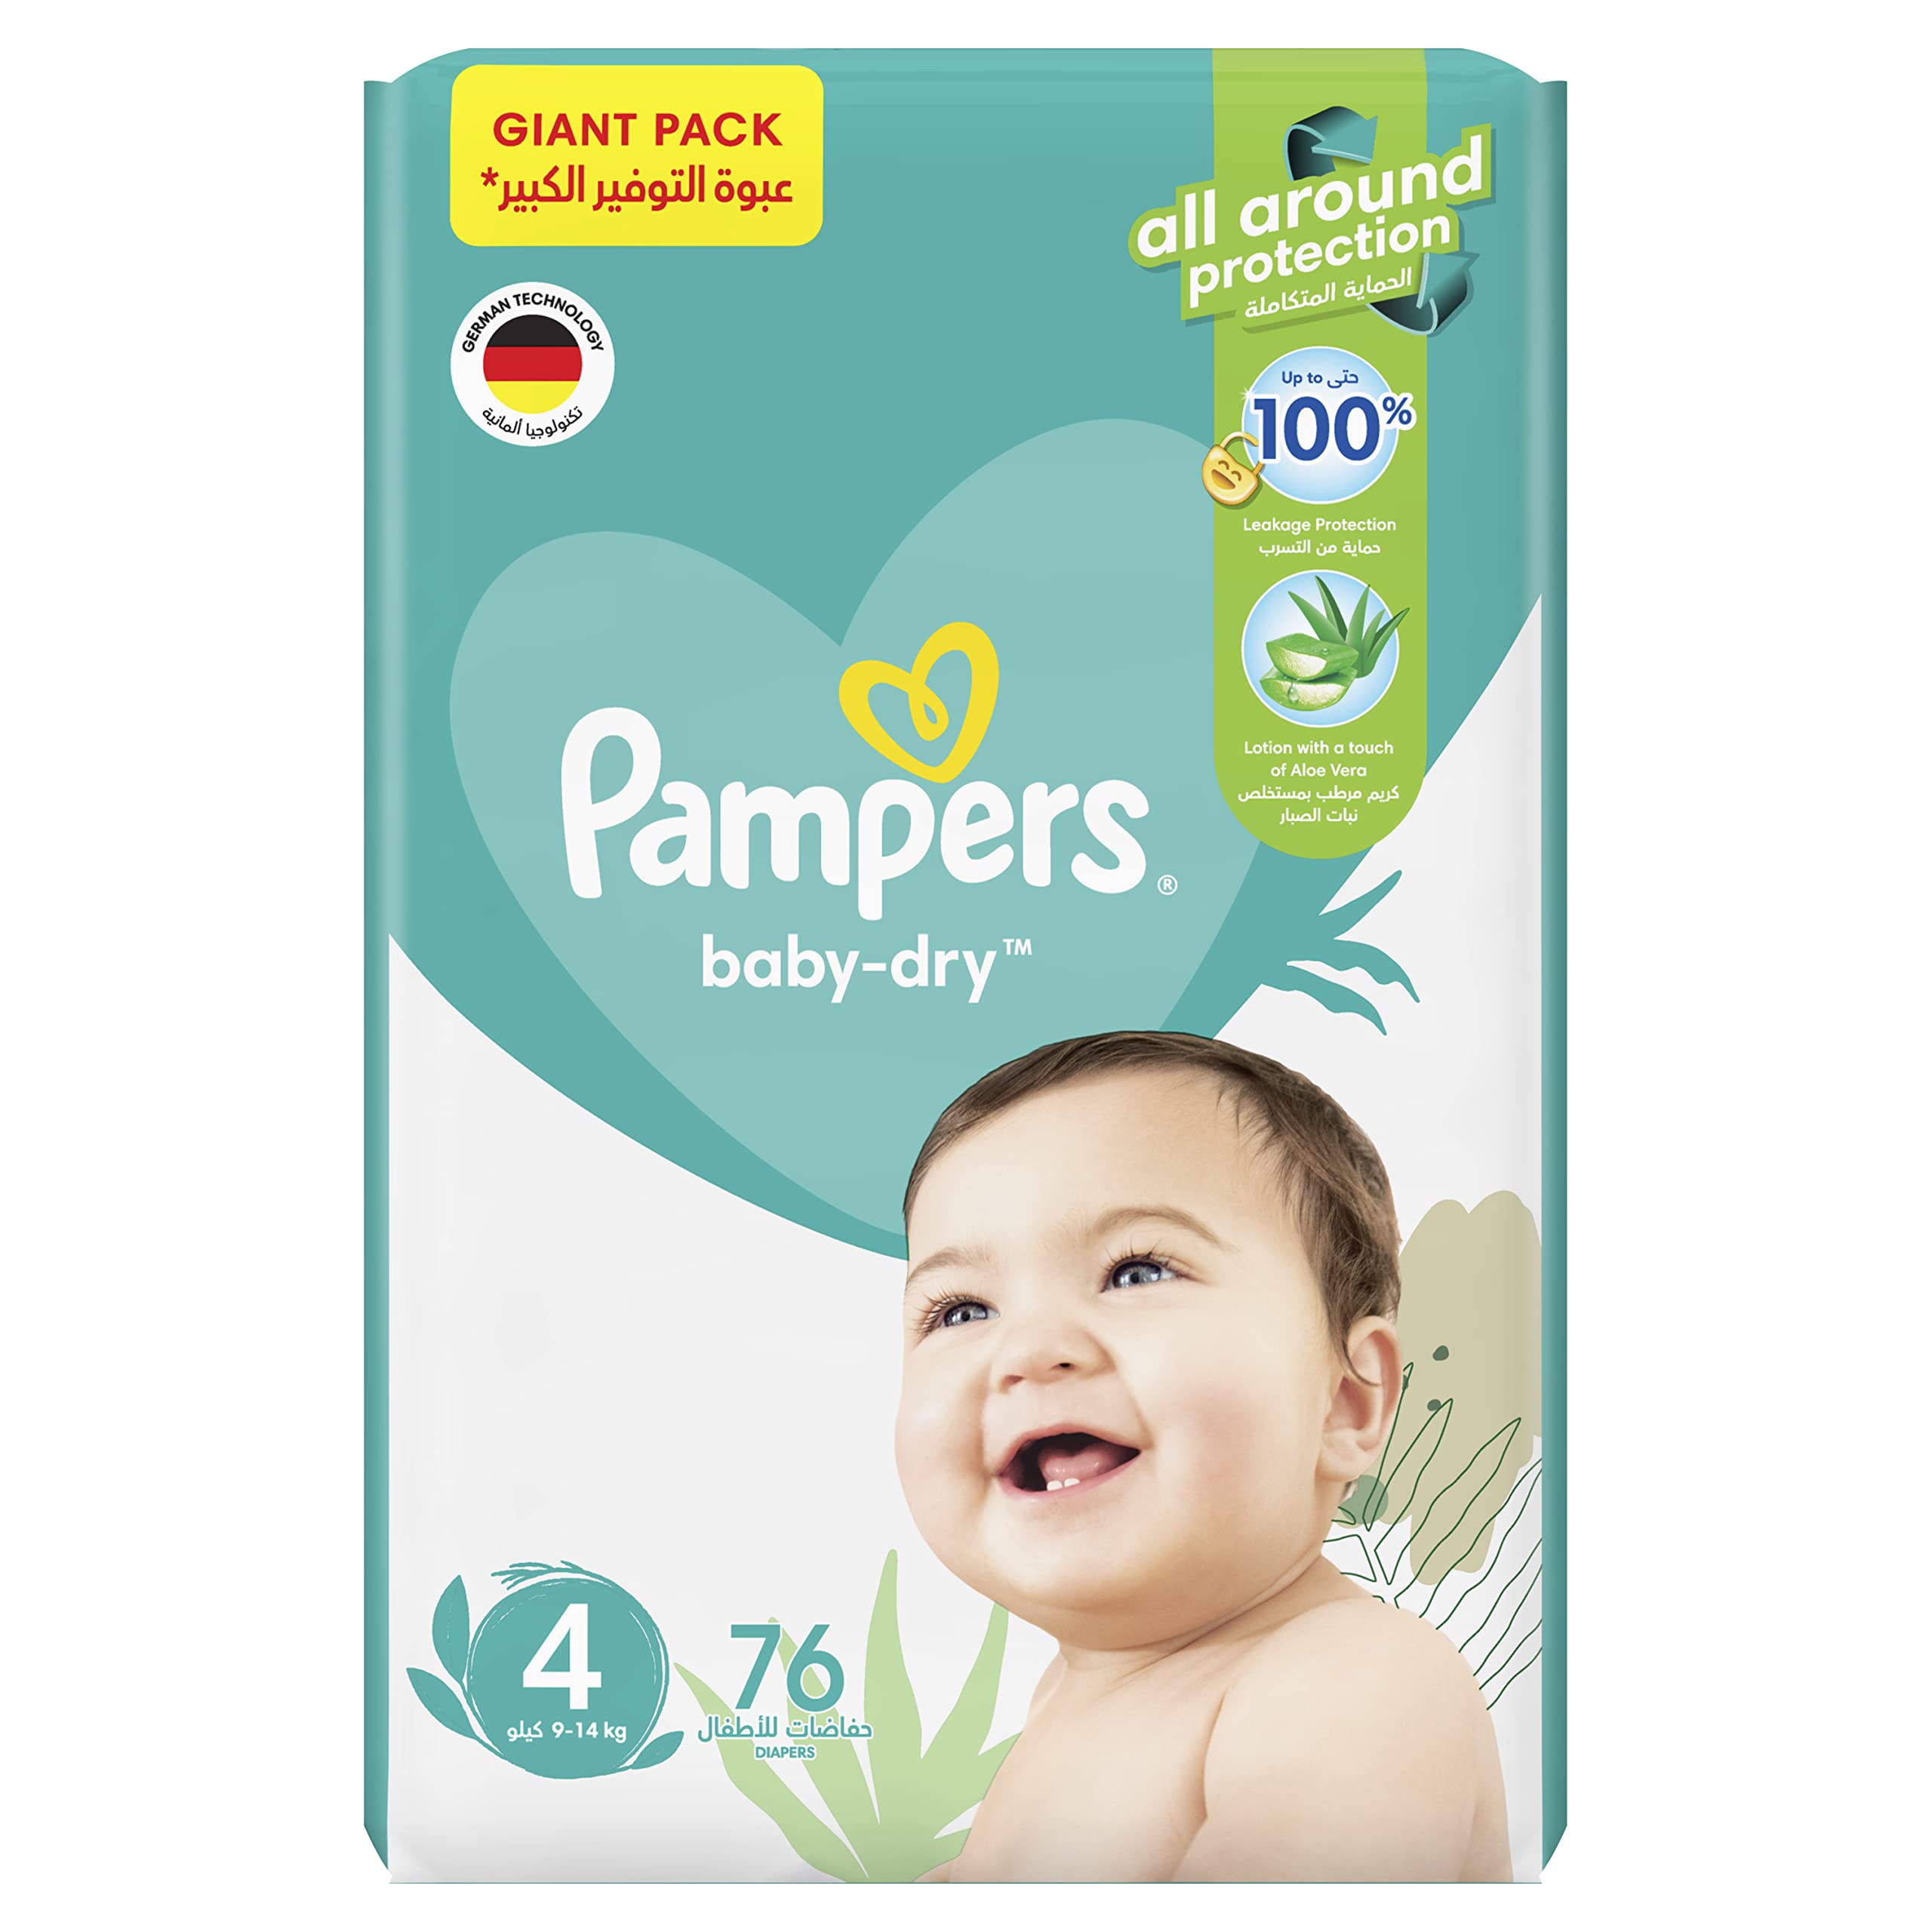 Pampers Baby-Dry Diapers with Aloe Vera Lotion and Leakage Protection, Size 4, 9-14 kg, 76 Diapers حفاضات بامبرز  مقاس 4، كبير، 9-14 كلغ، عبوة التوفير الكبير، 76 حفاضاً